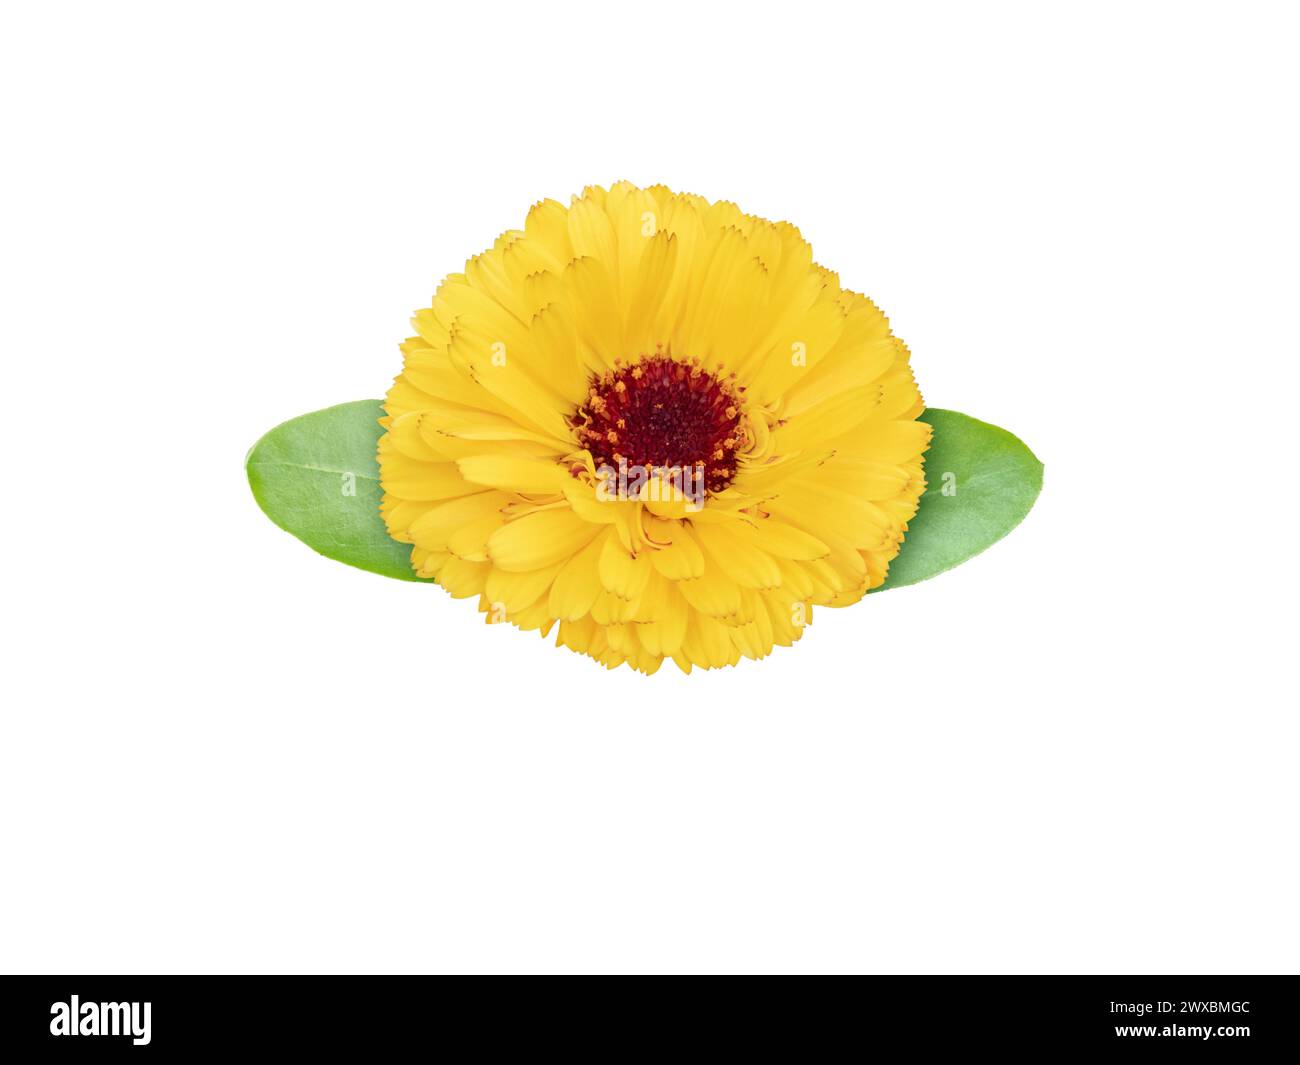 Marigold flowering medicinal plant.  Calendula officinalis bright orange flower with leaves isolated on white. Stock Photo